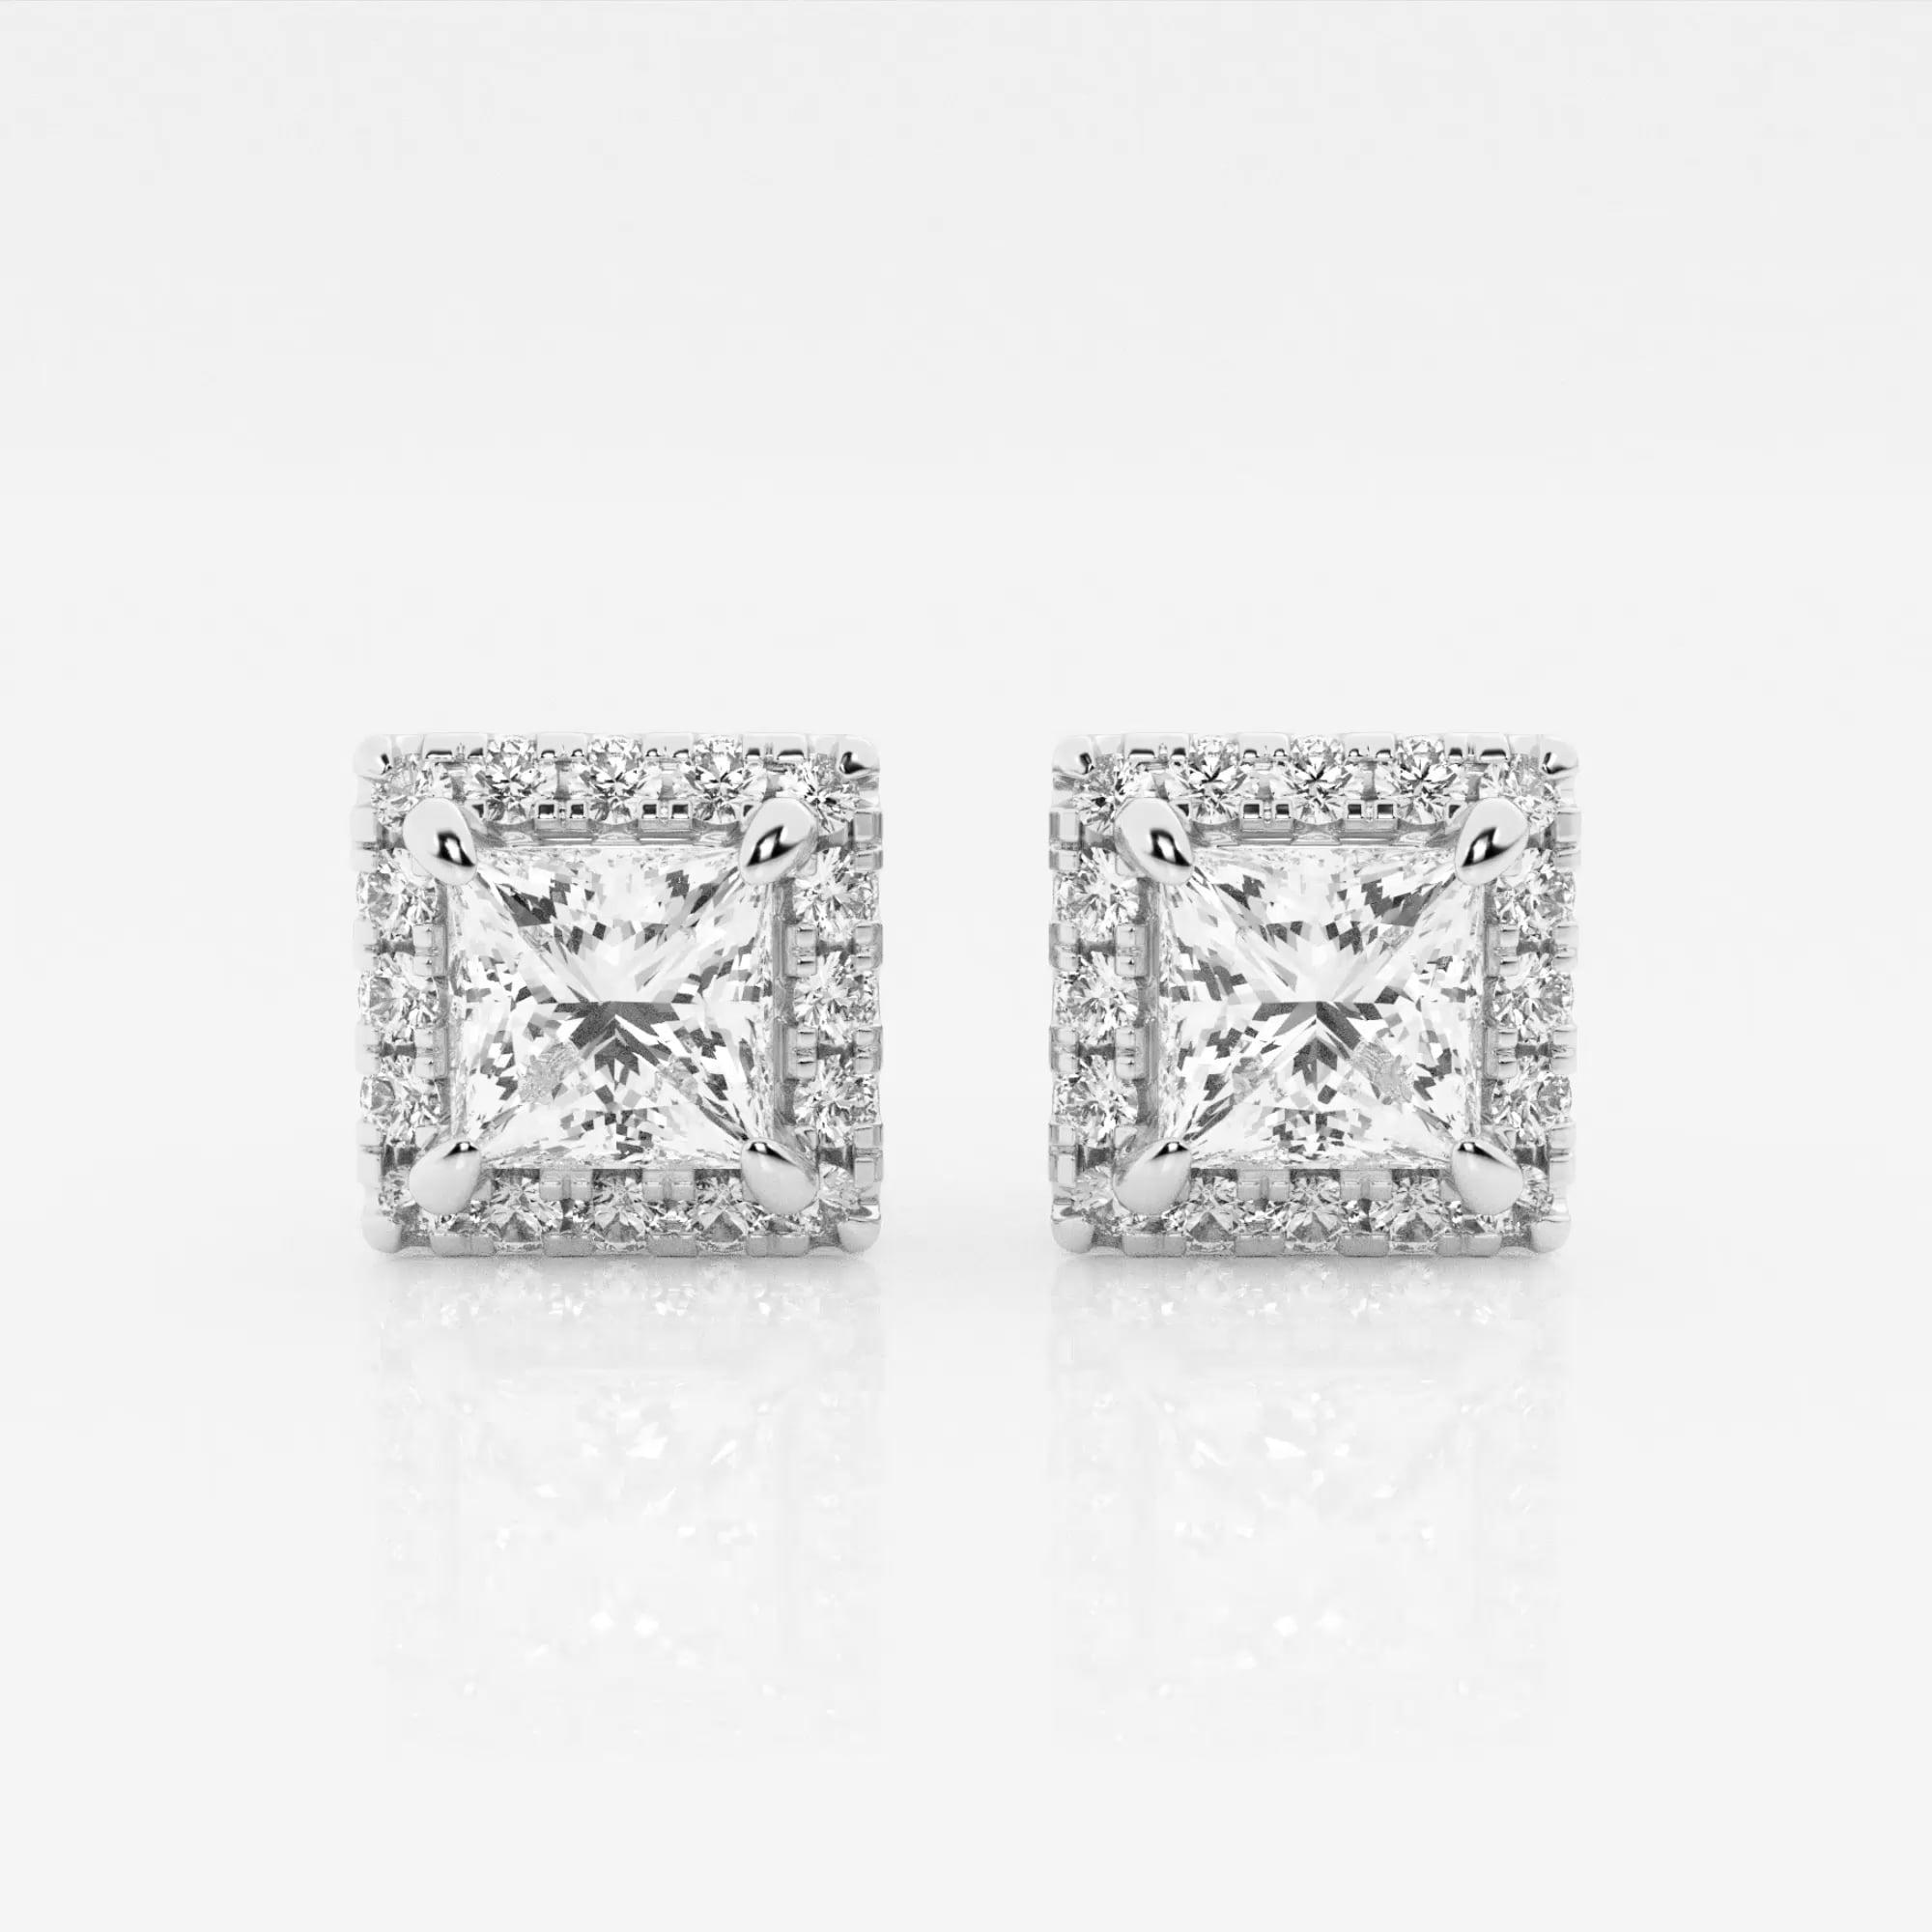 product video for 2 3/8 ctw Princess Lab Grown Diamond Halo Certified Stud Earrings